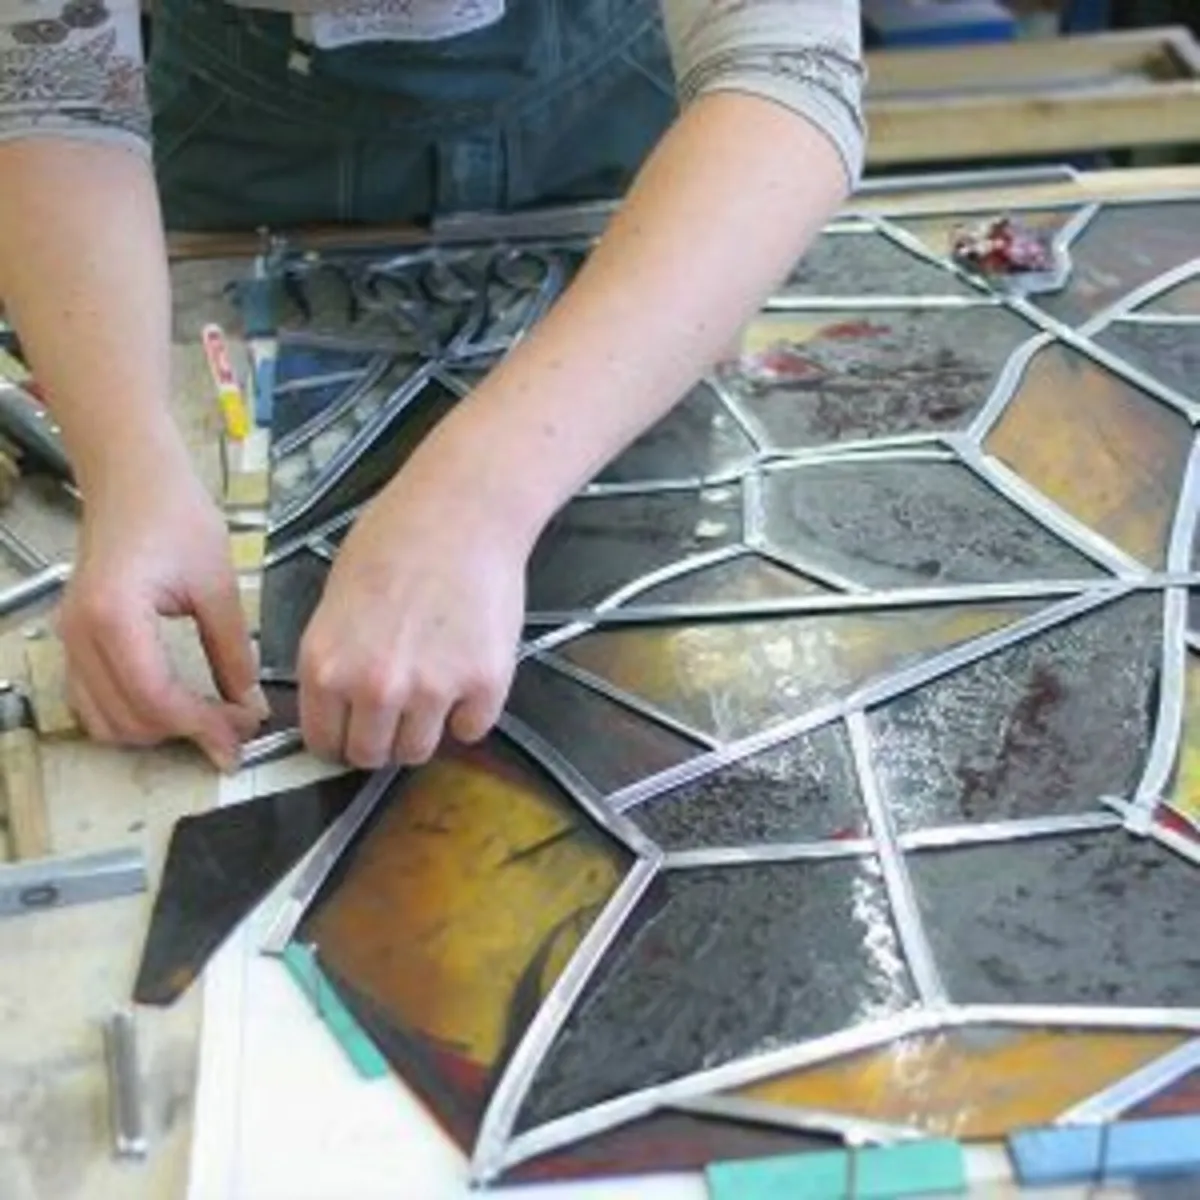 STAINED GLASS MOBILE REPAIR - Image 1